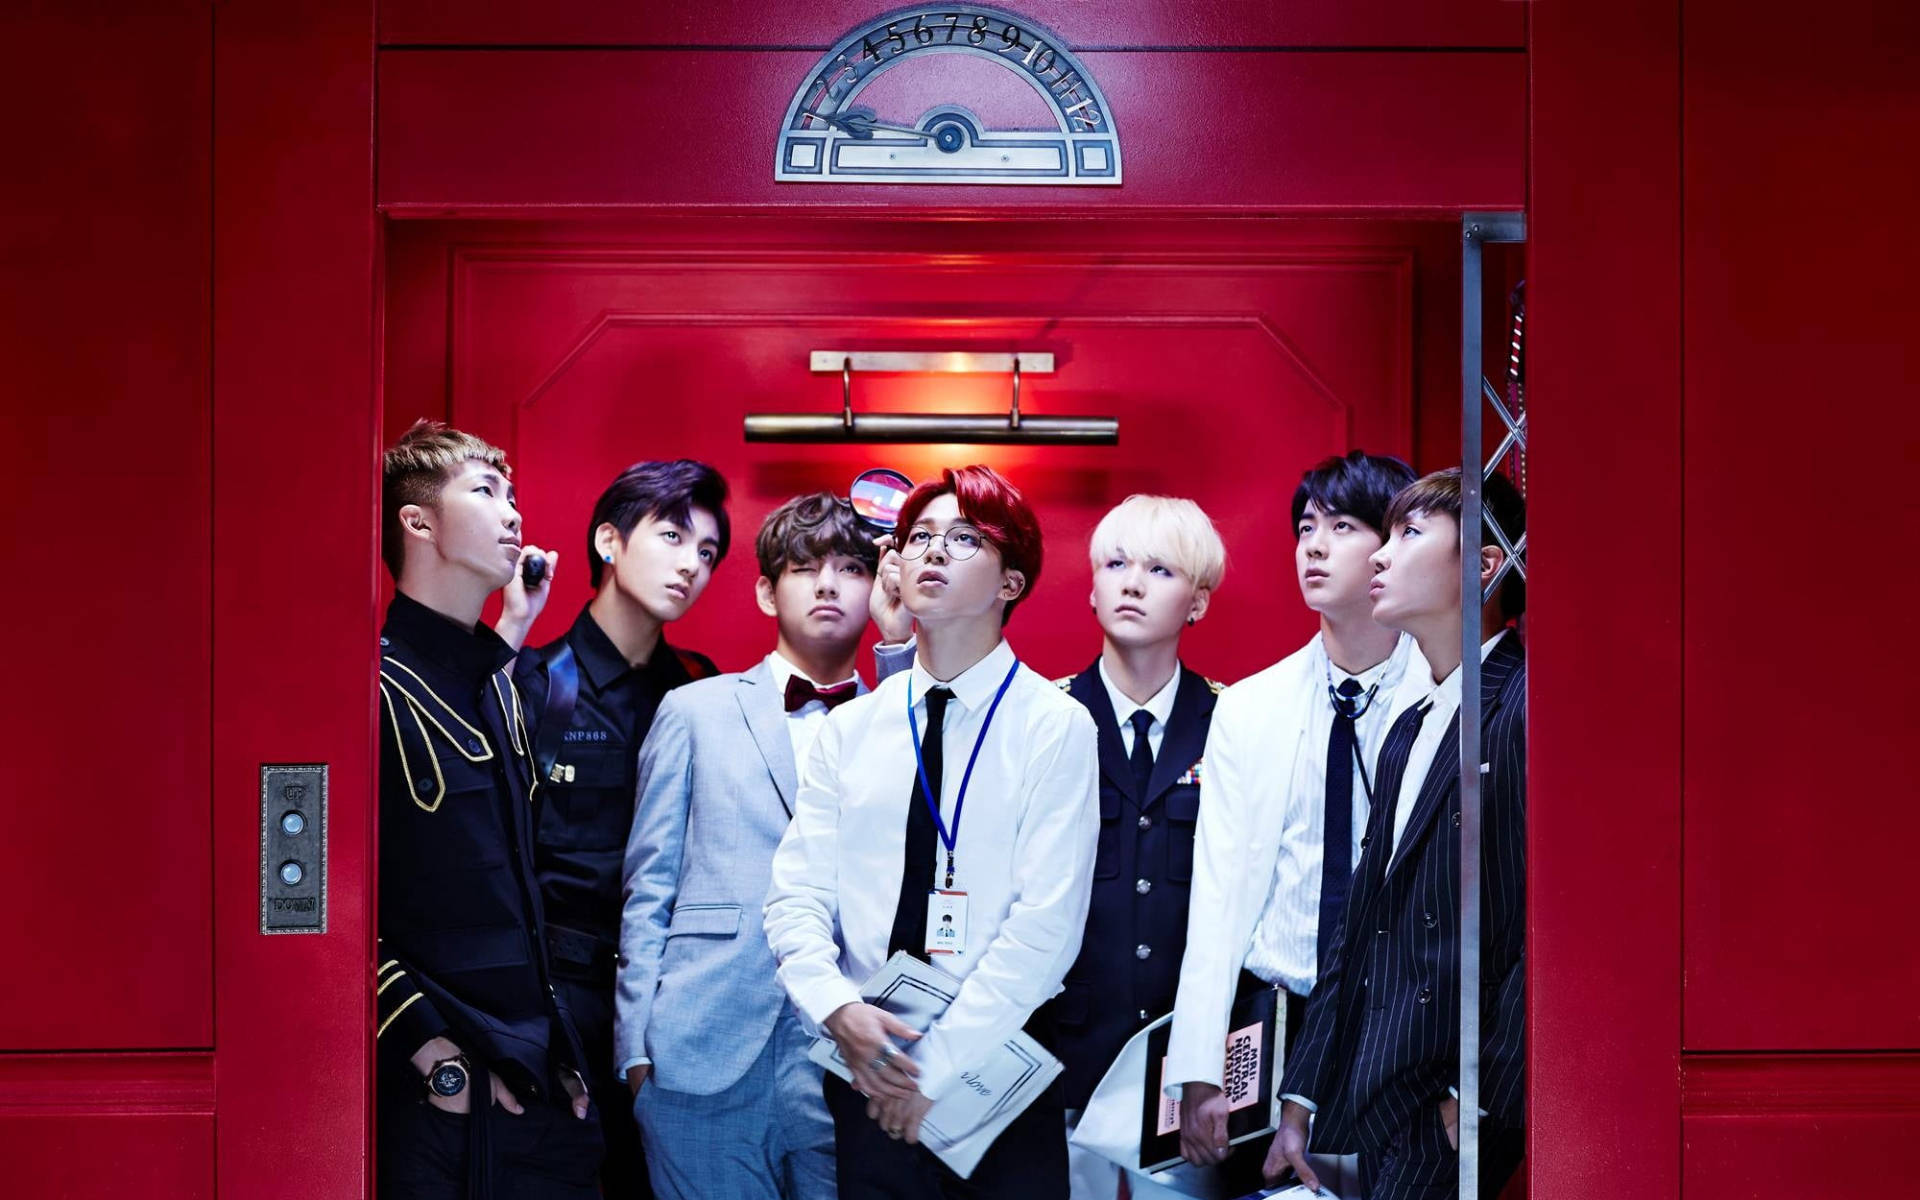 Cute Bts Group In A Red Elevator